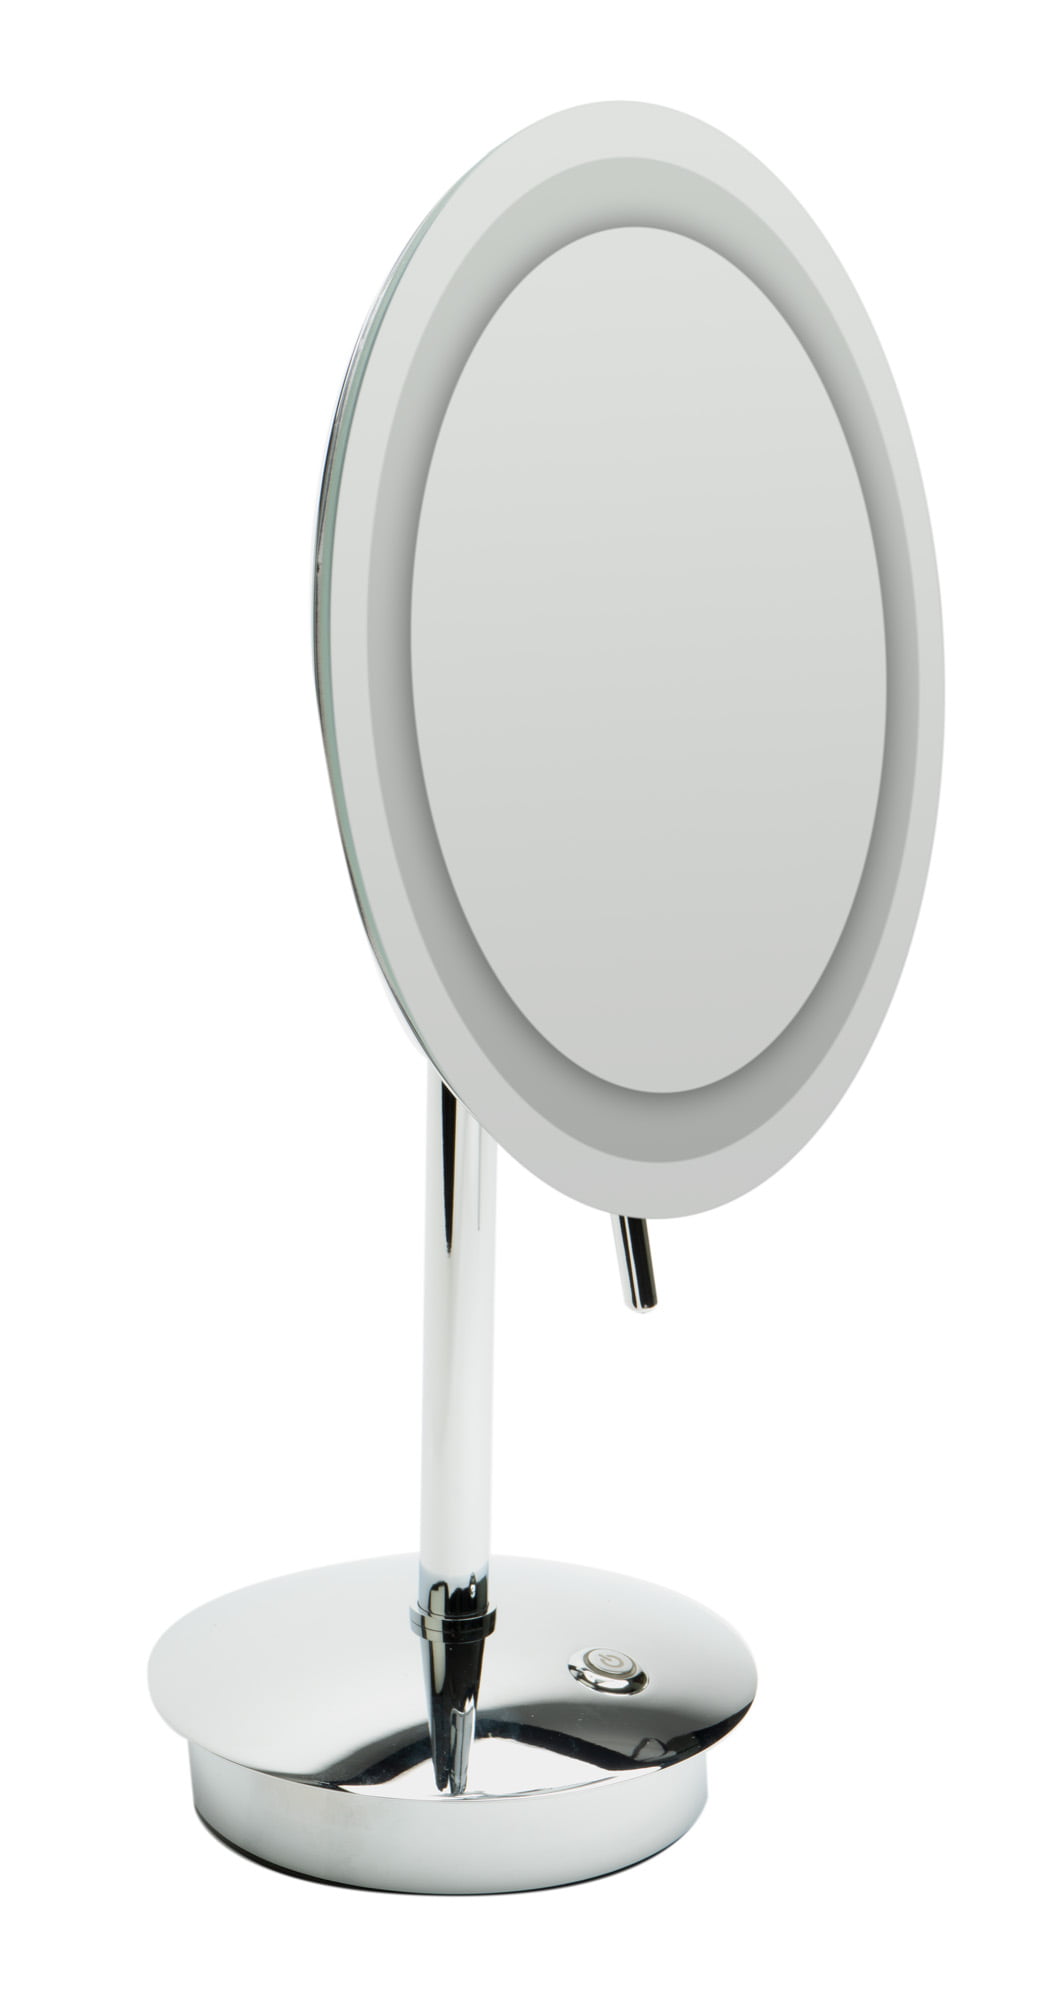 Abm9fled-pc 9 In. Tabletop Round 5x Magnifying Cosmetic Mirror With Light - Polished Chrome